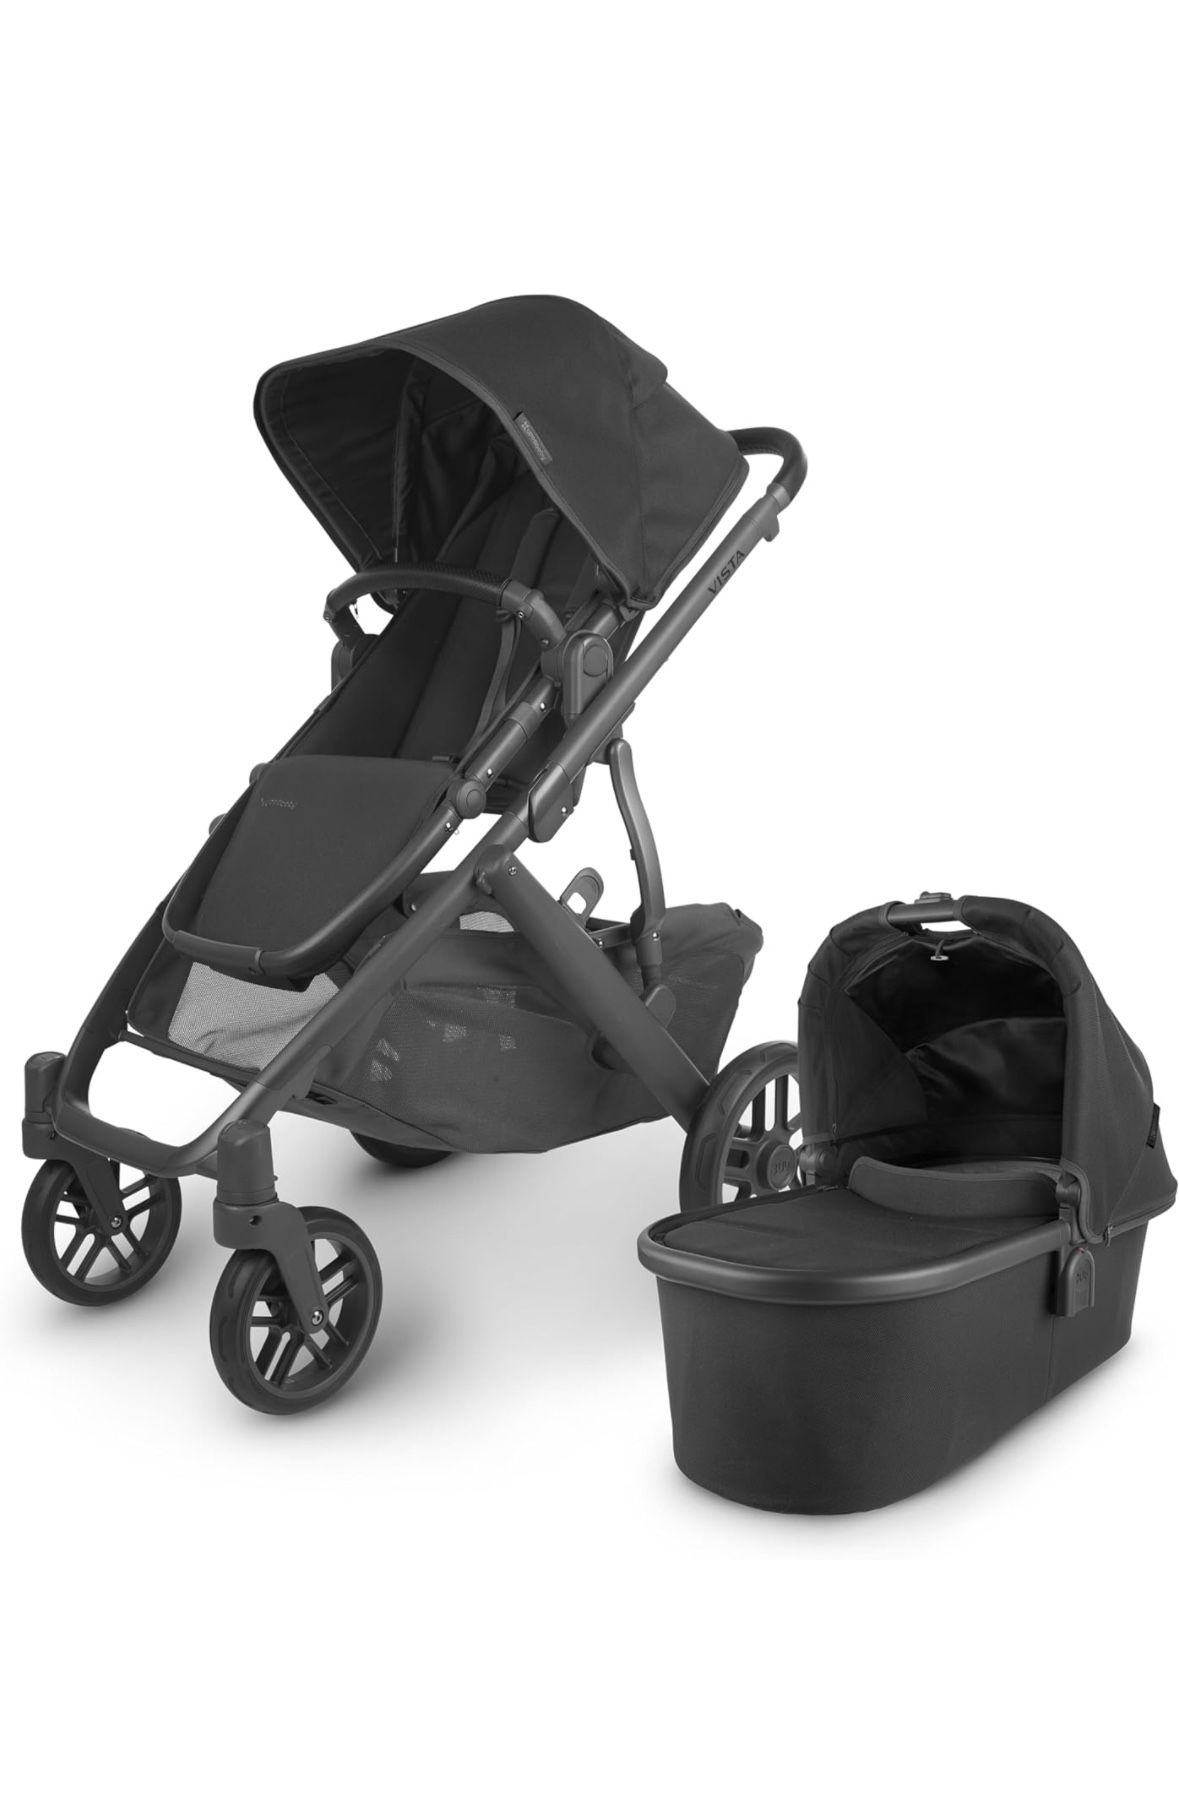 Uppababy Vista V2 Stroller Convertible Single To double System 